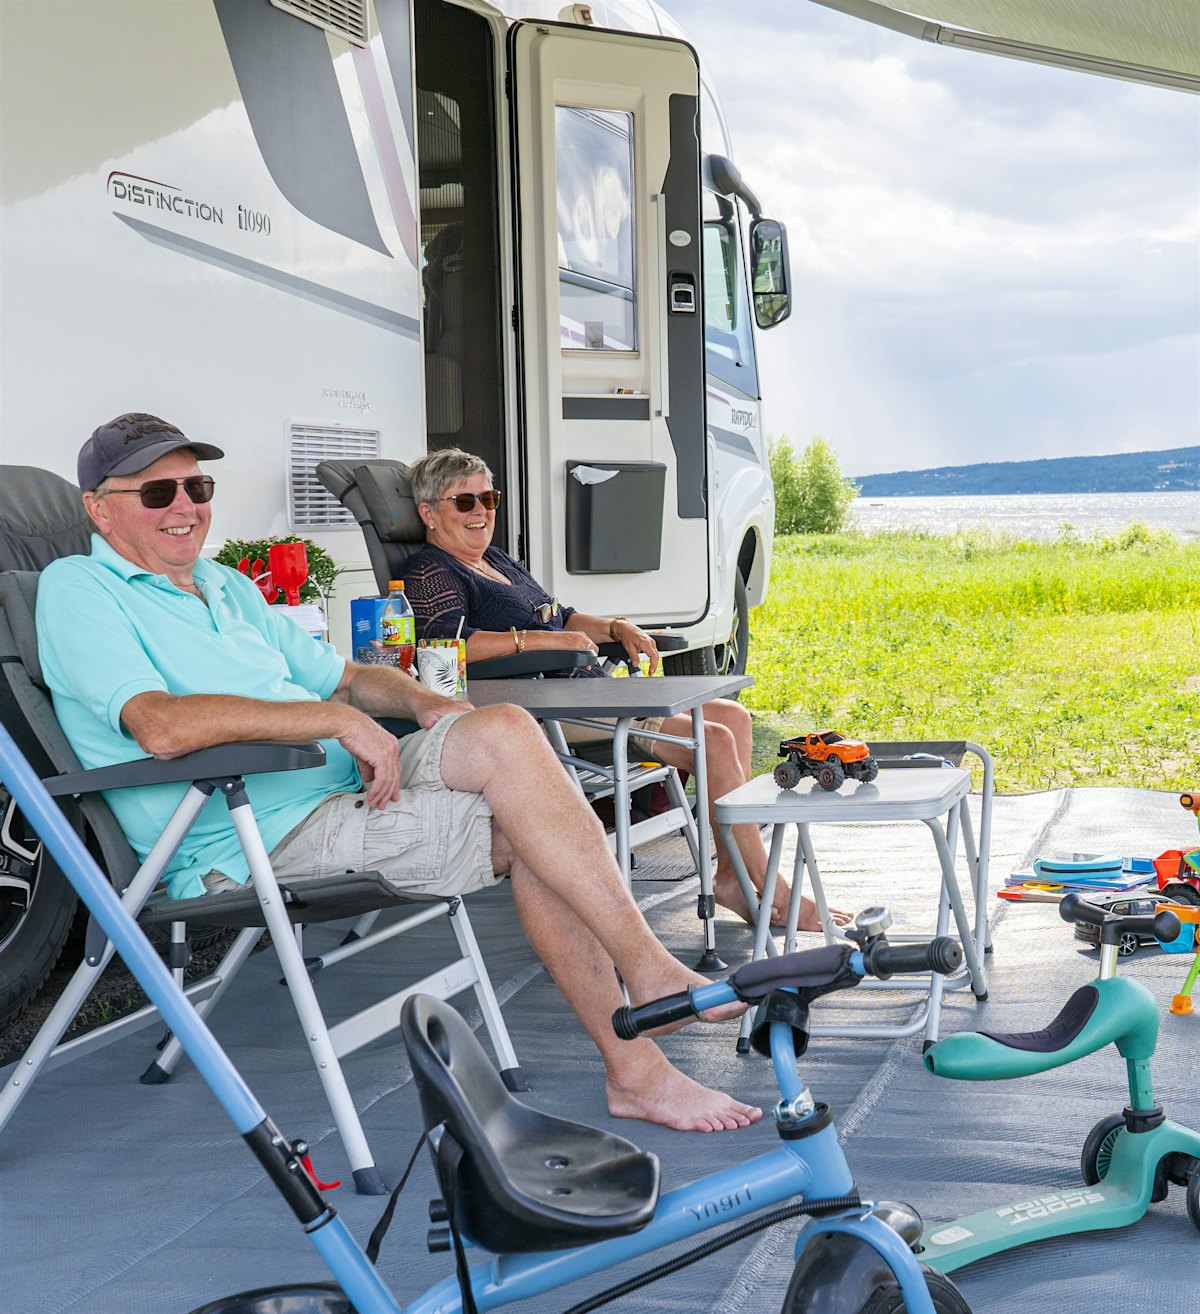 A grandfather, a grandmother and a boy are sitting outside a mobile home and enjoying themselves. Two sitting scooters are in the foreground, water and grass in the background. Photo